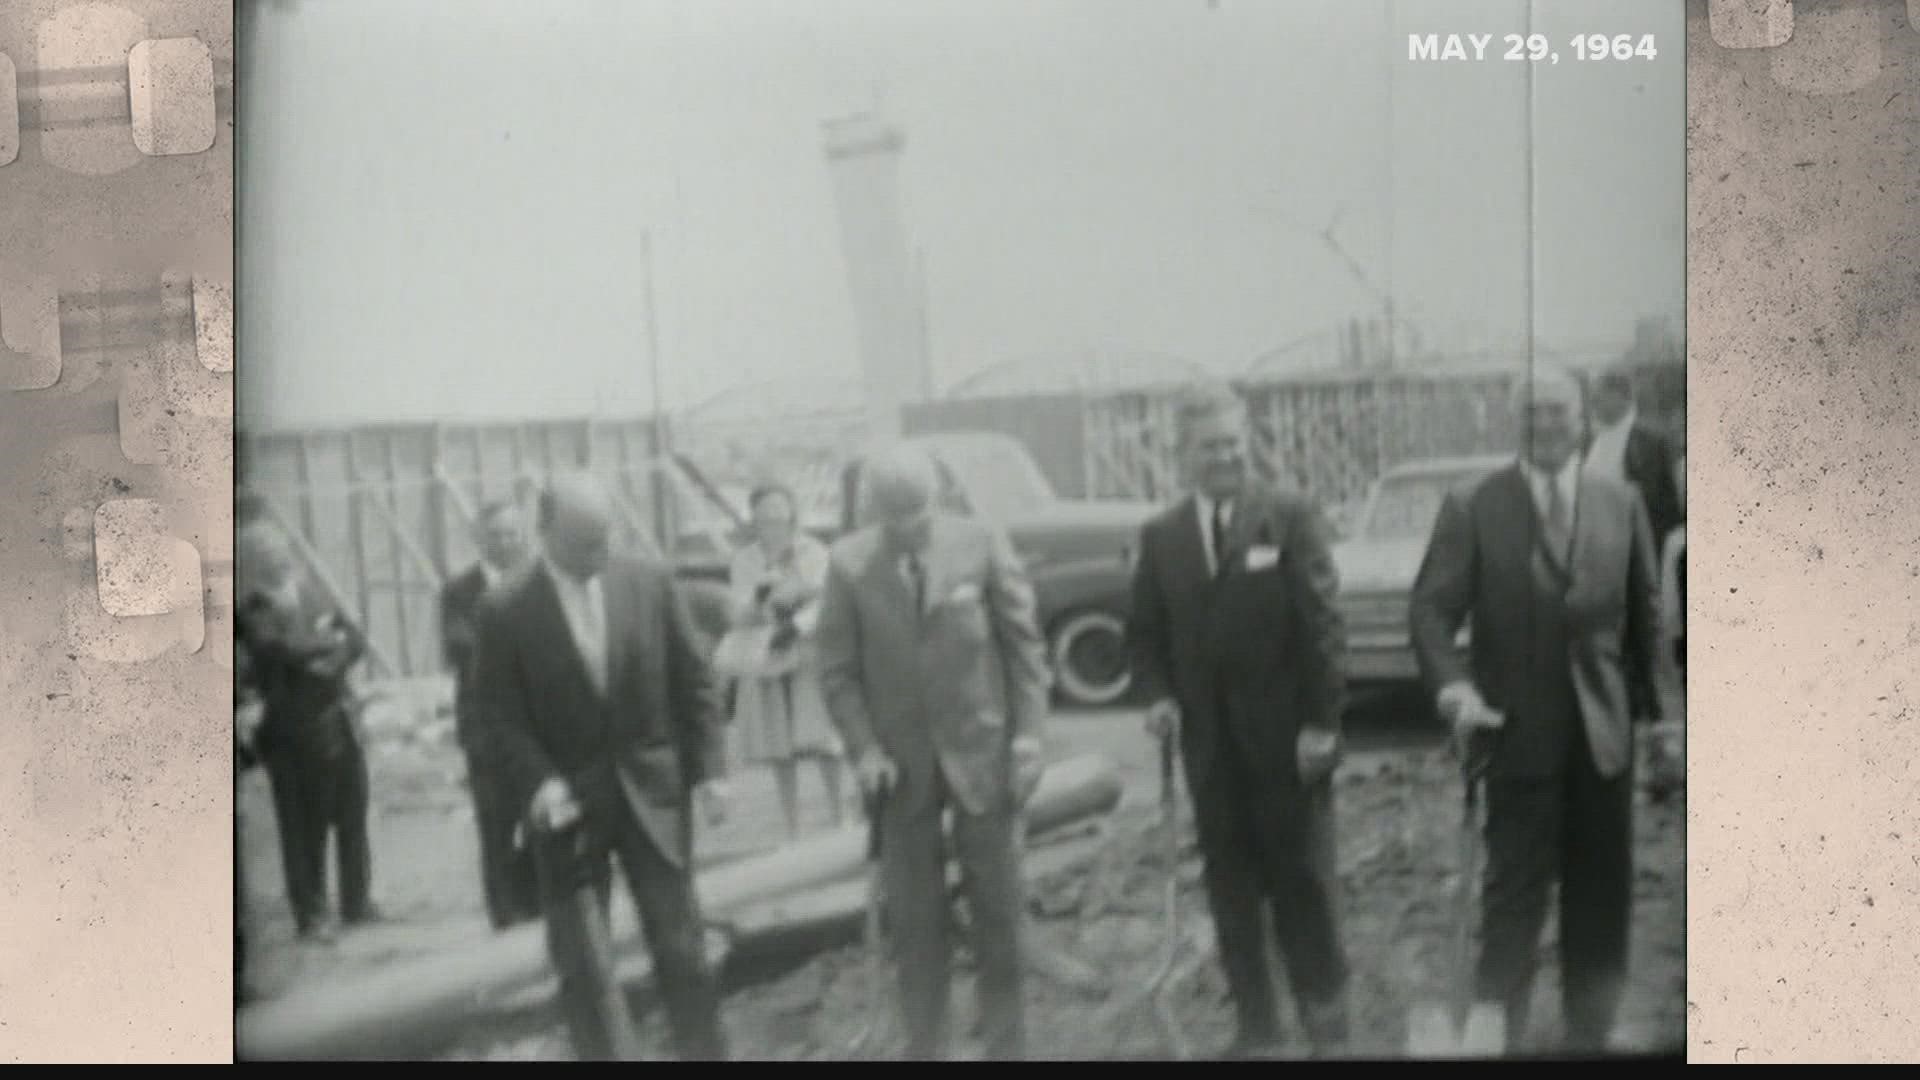 This week's Vintage KSDK goes back to May 29, 1964, when ground was broken on the three towers of the Mansion House Apartments downtown.